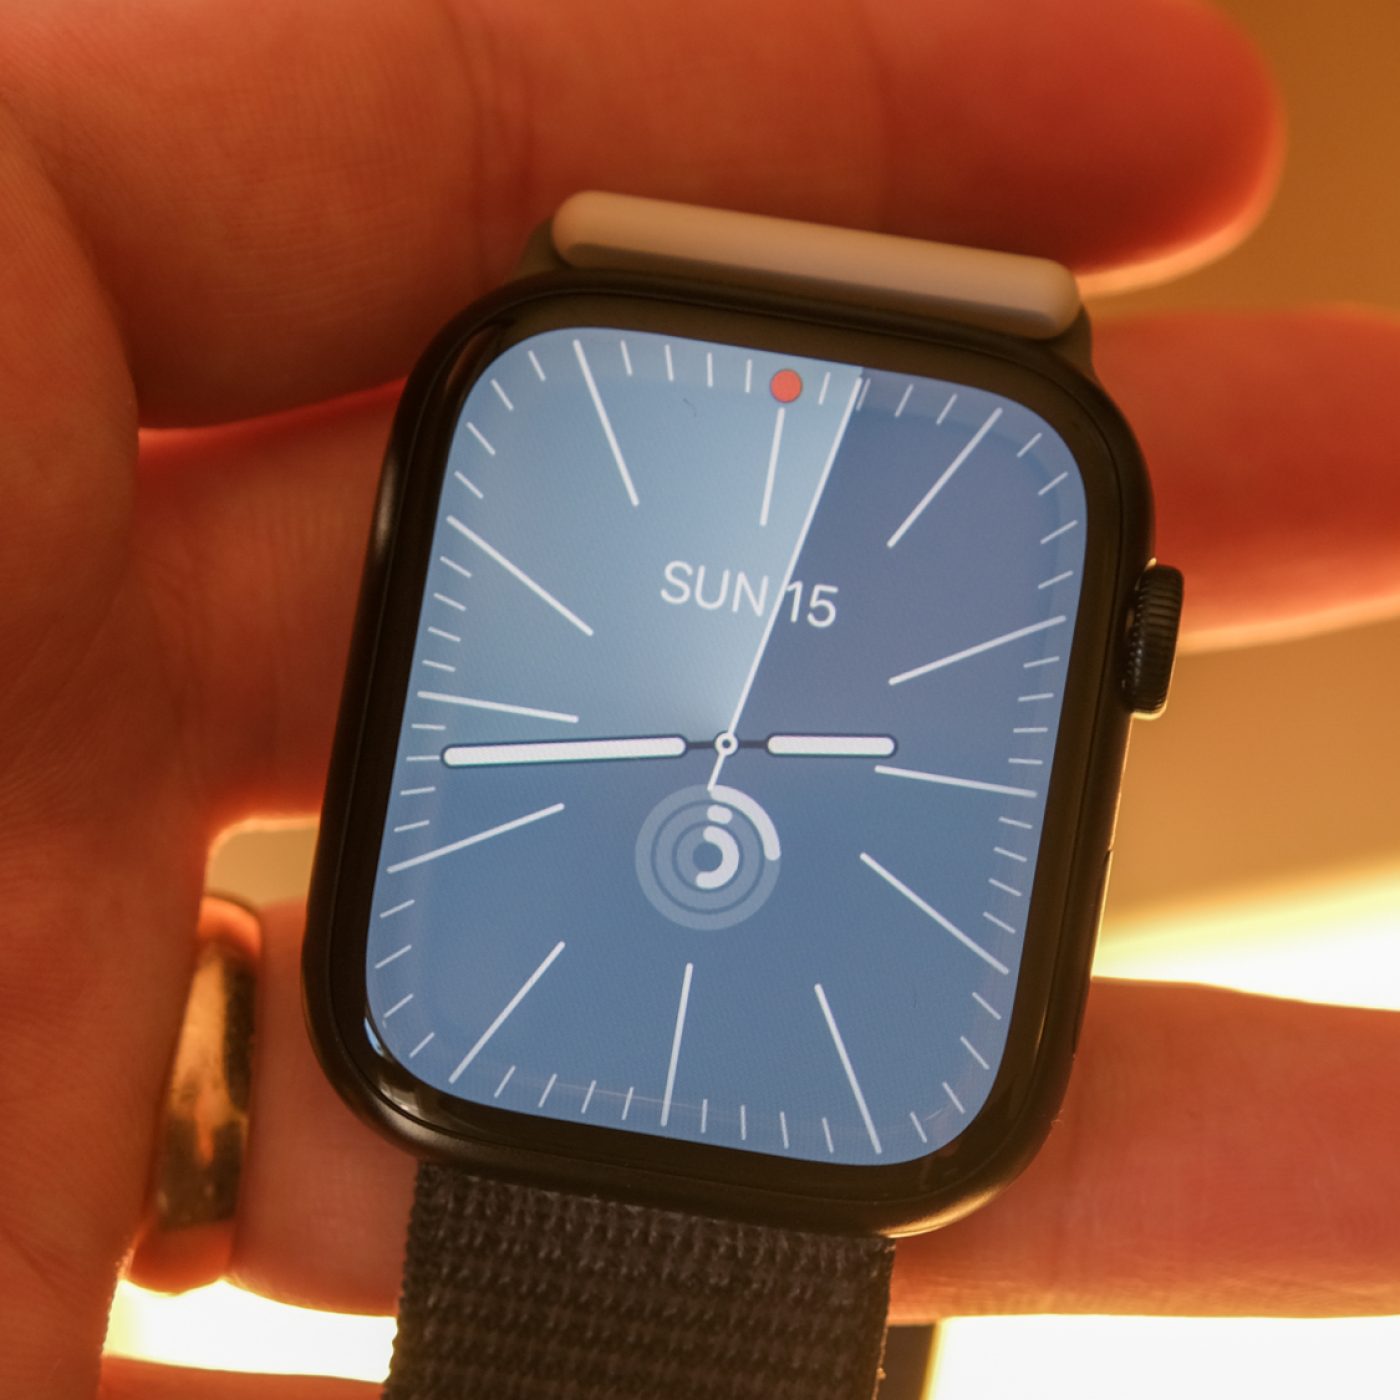 The Apple Watch 9 is back on sale for the first time since the ban